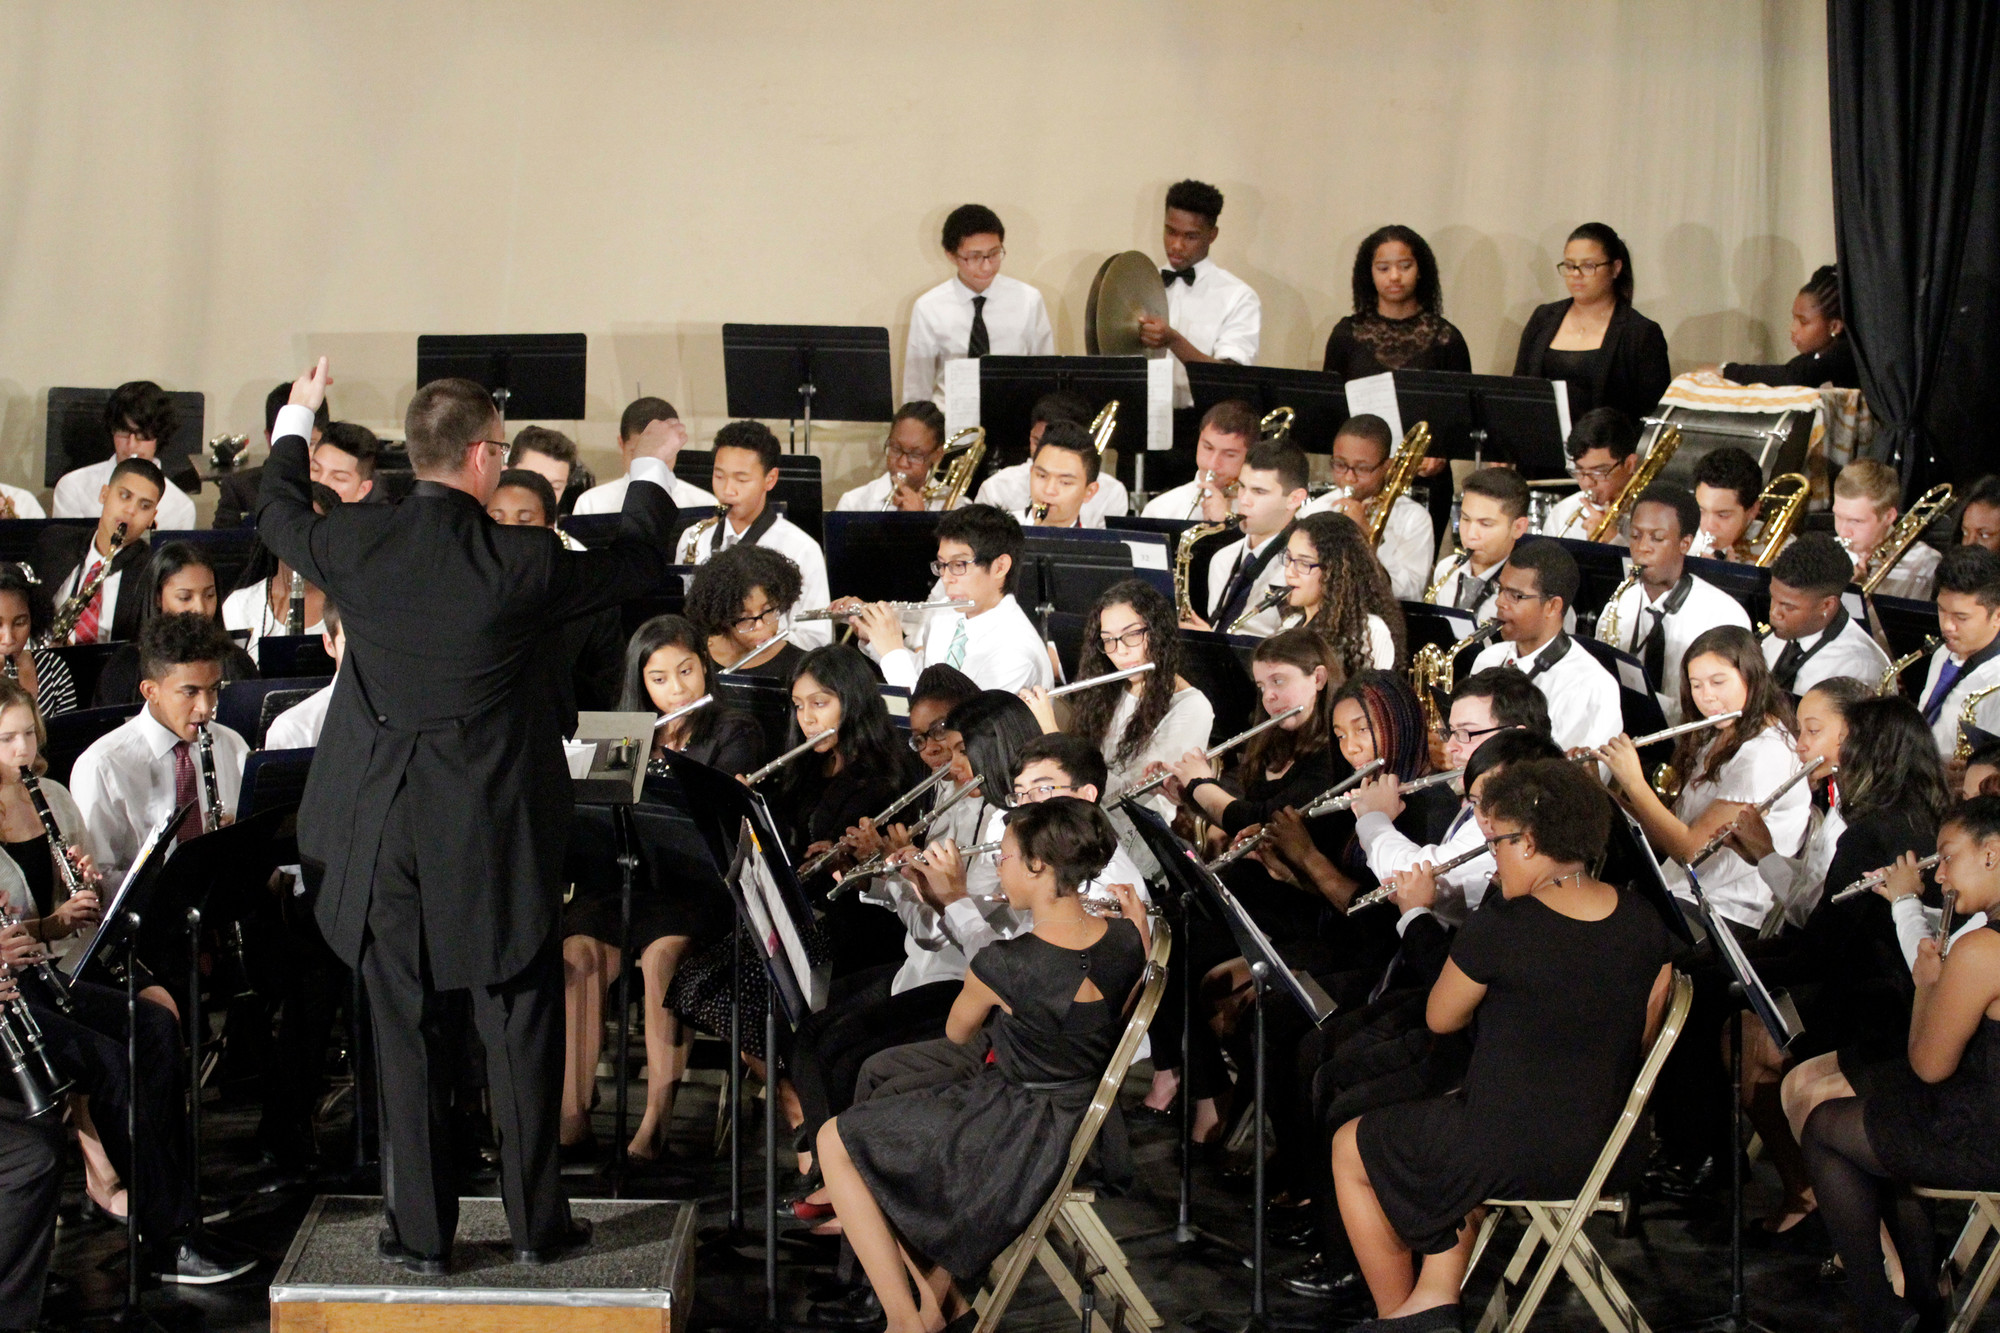 The Central High School band showed its stuff during the winter concert.